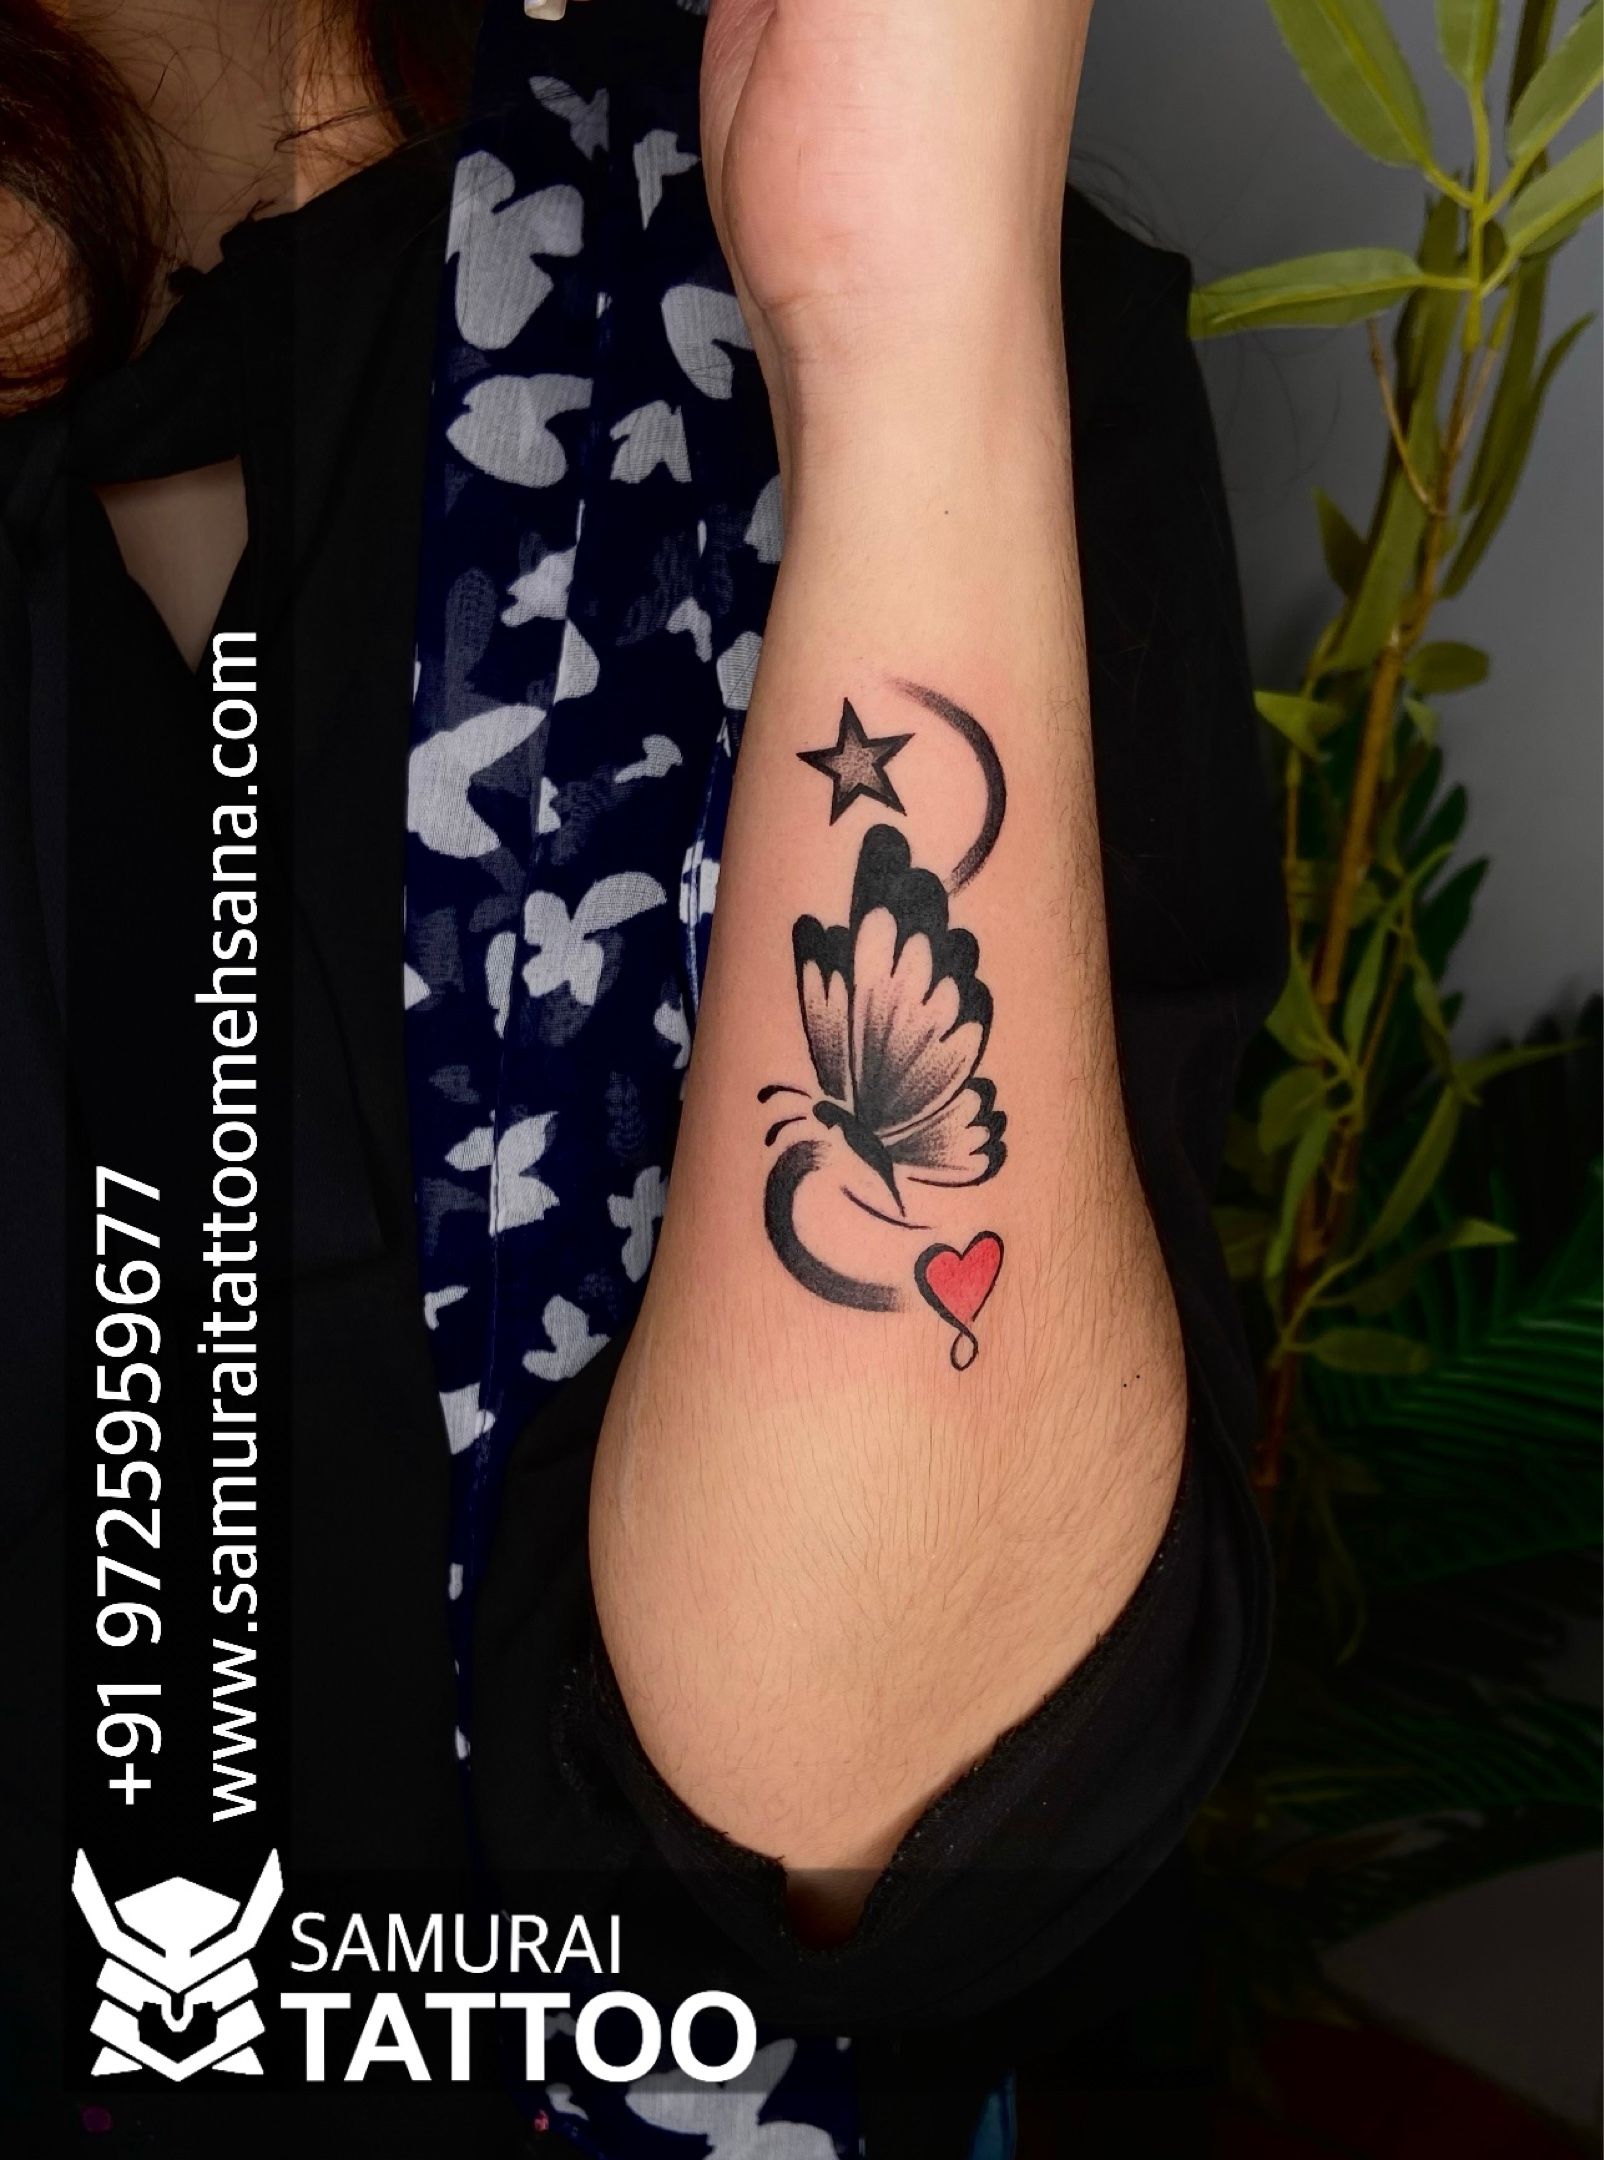 Tattoo uploaded by Vipul Chaudhary  Butterfly tattoo butterfly tattoo  design Tattoo for girls New butterfly tattoo  Tattoodo